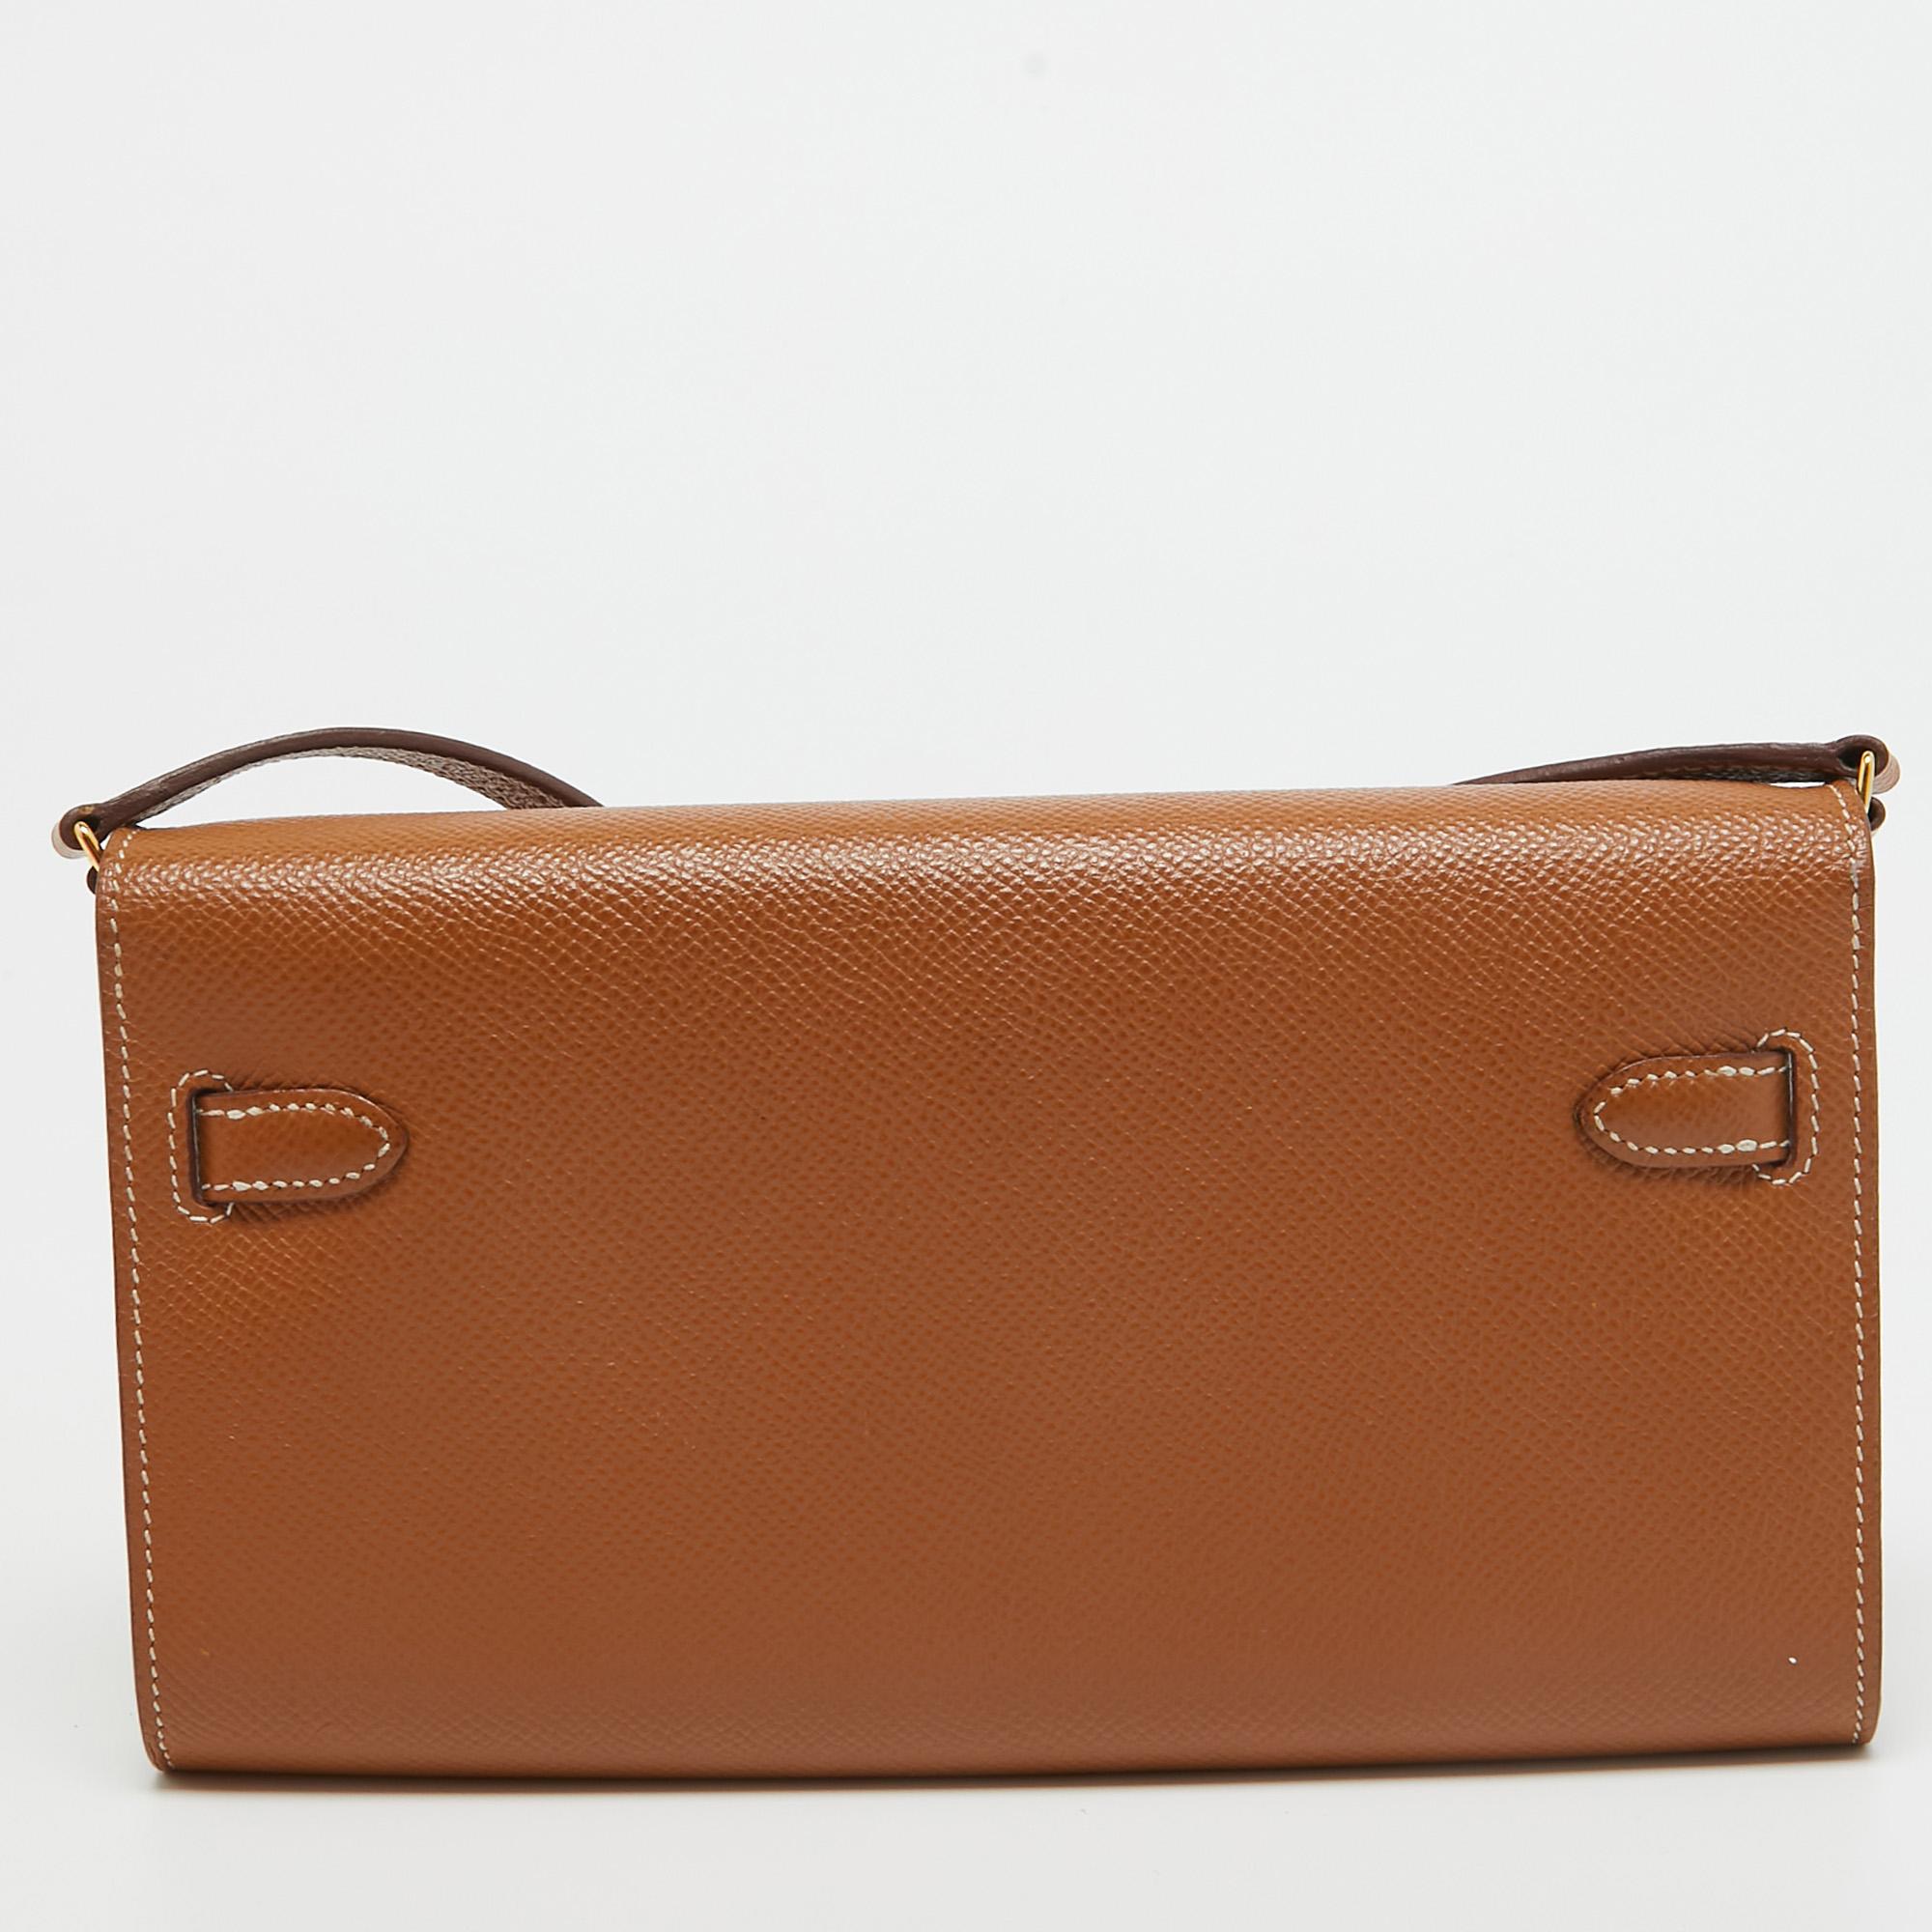 The Kelly is a name synonymous with Hermès. It is a symbol of their wondrous dedication to craftsmanship and classic style, just like this lovely wallet made from fine leather. It features a beautiful hue and the signature lock in gold tone. An